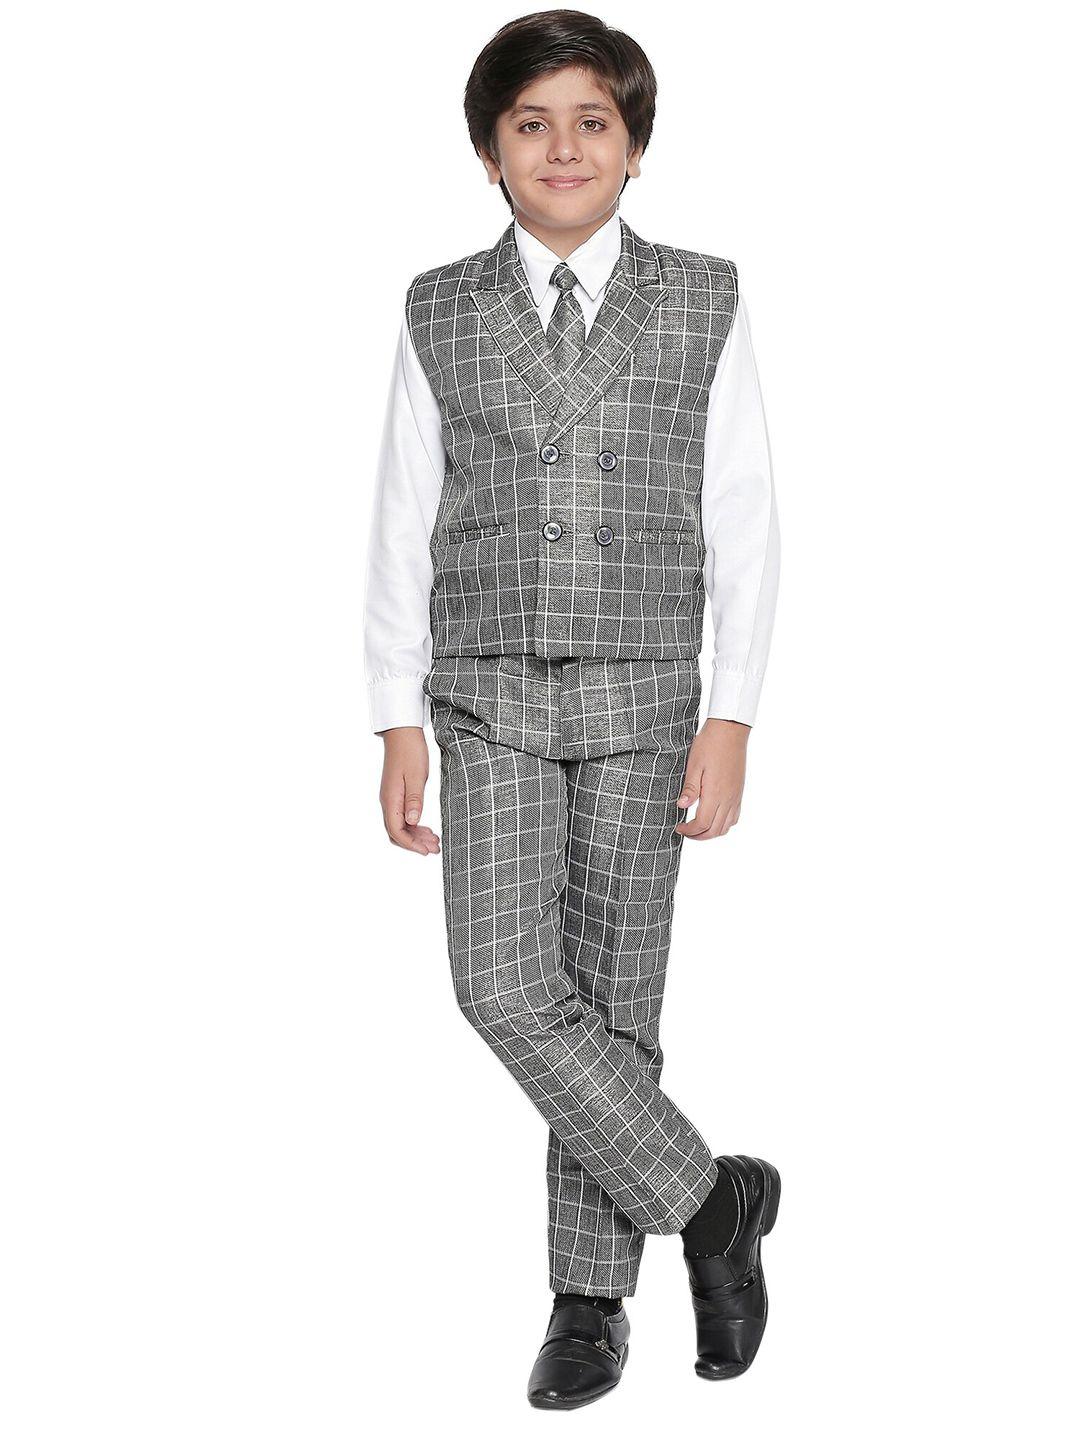 jeetethnics boys grey & white checked shirt with trousers